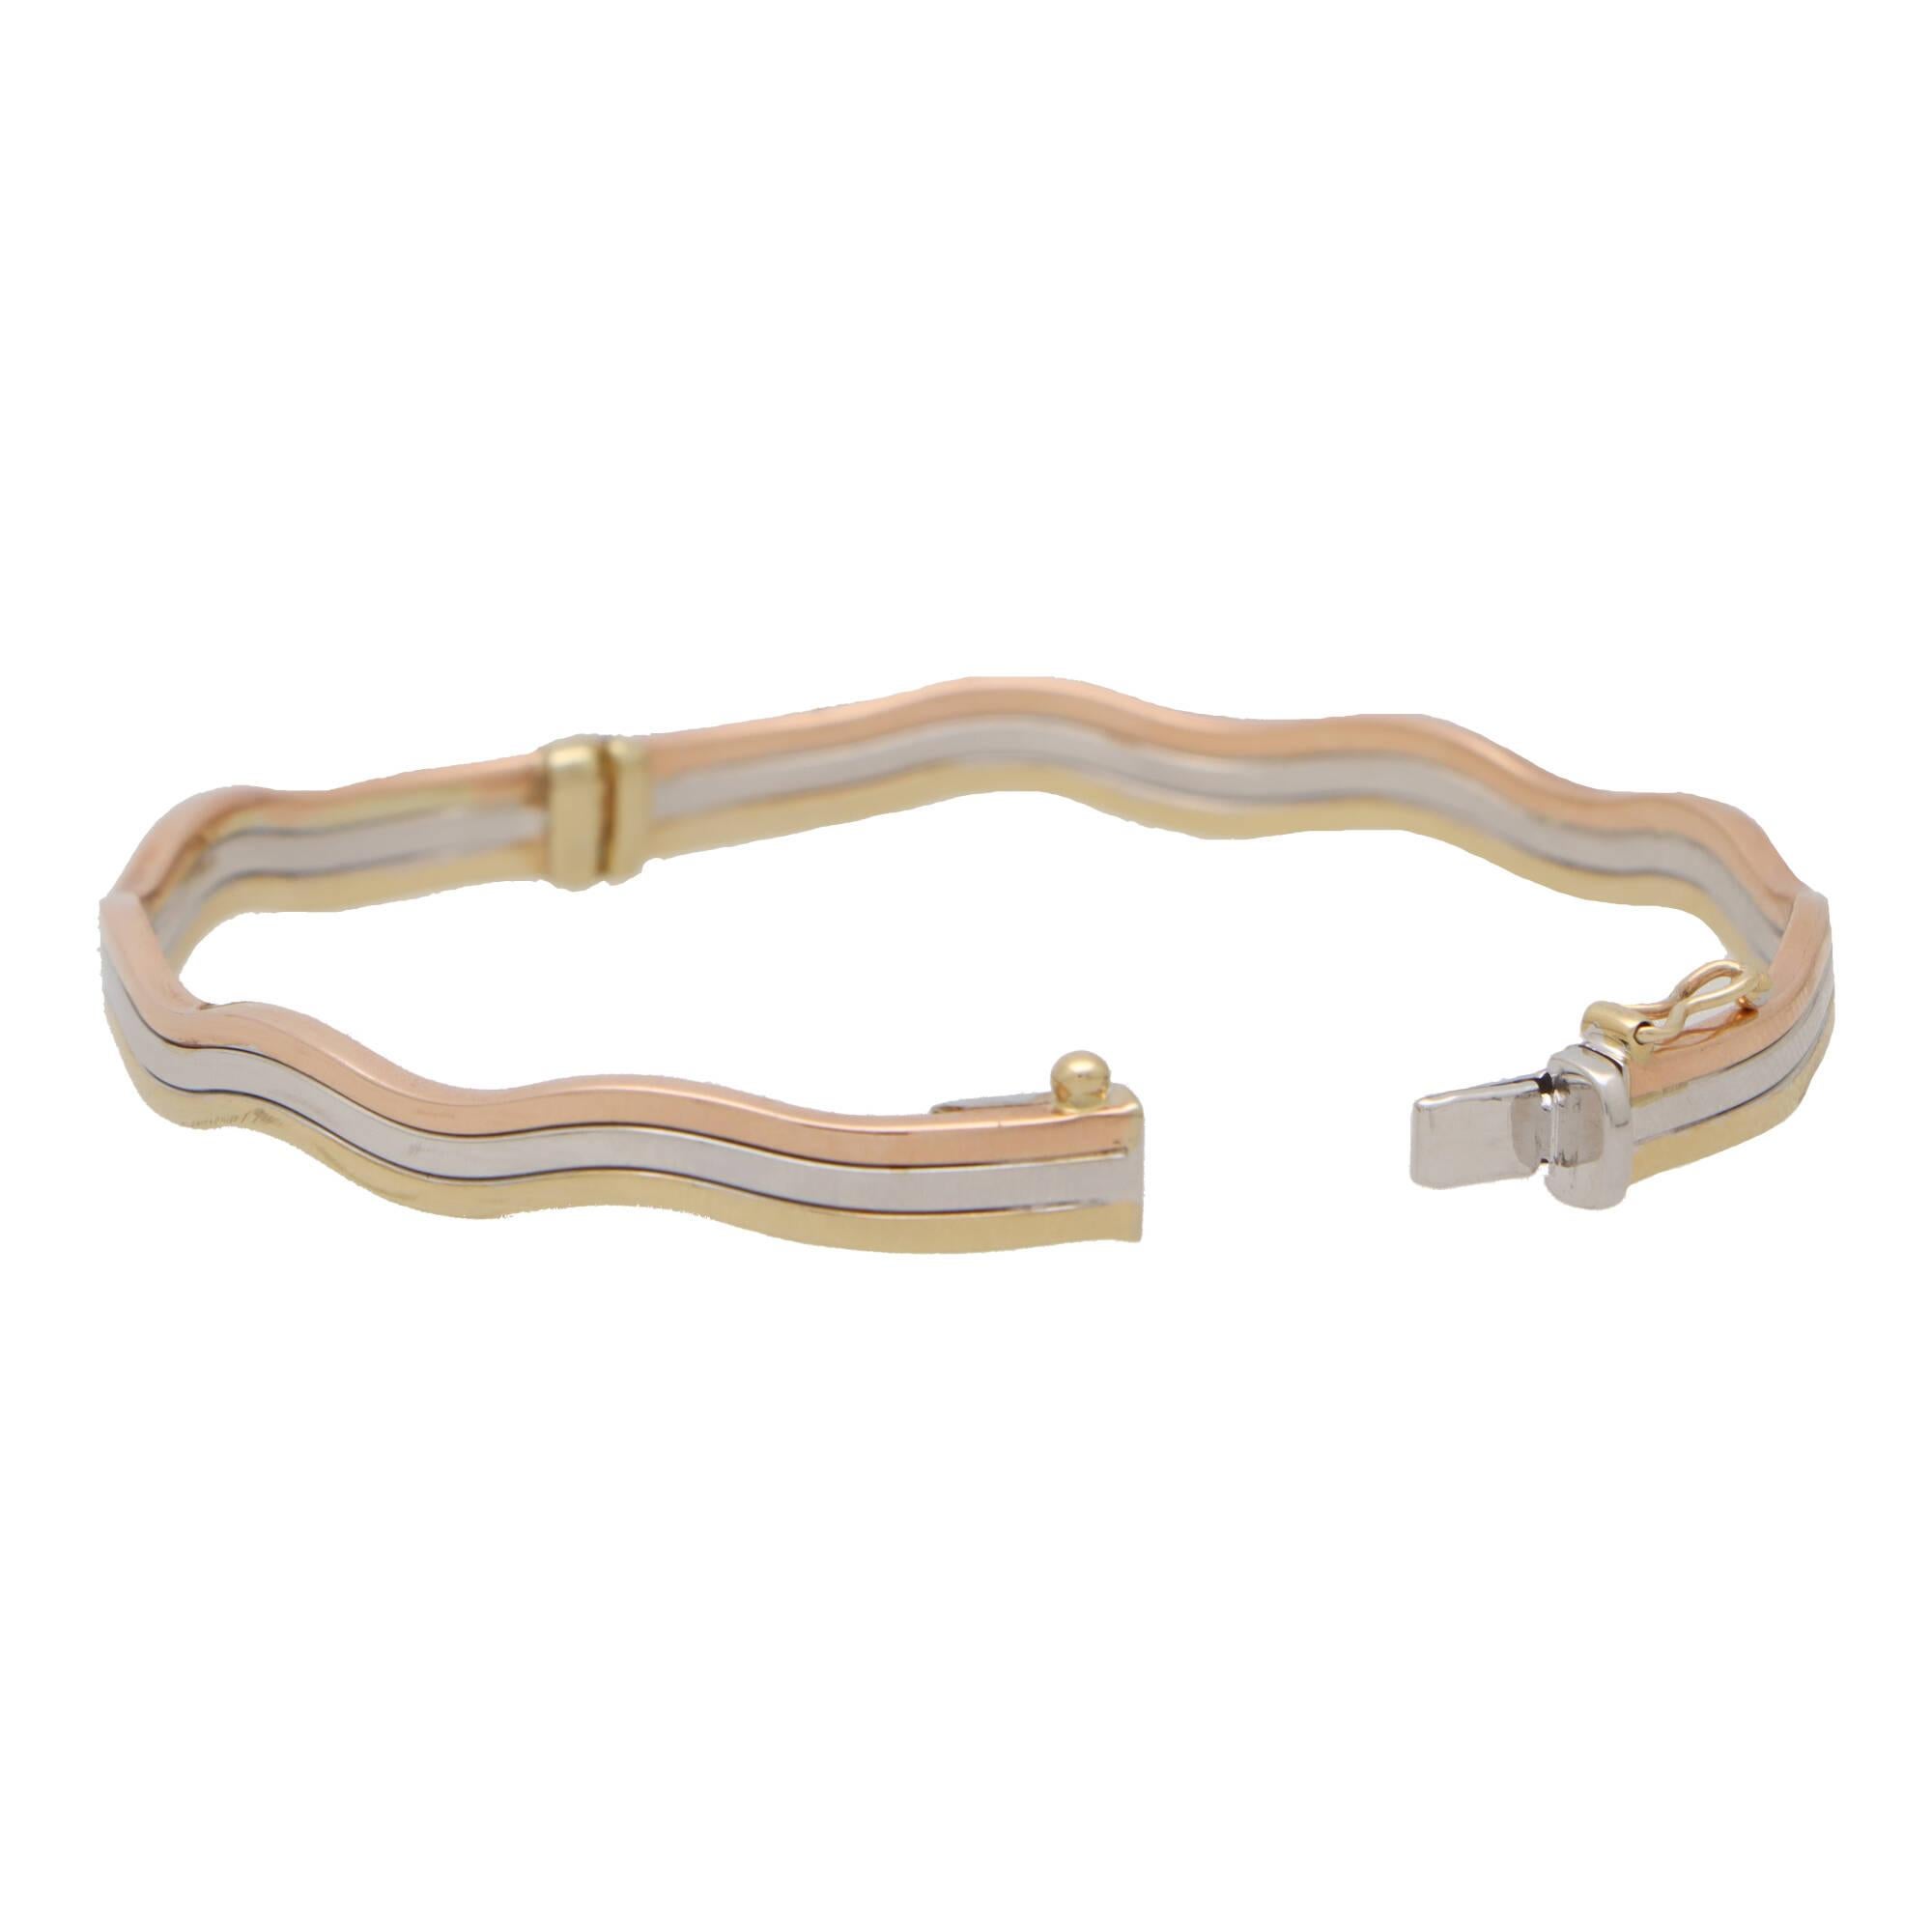  A beautiful hinged trinity wave bangle set in 9k yellow, rose and white gold.

The bangle is composed of three soldered tri-colored bangles which are all interlocked together in a unique wave trinity design. If you love the trinity design but